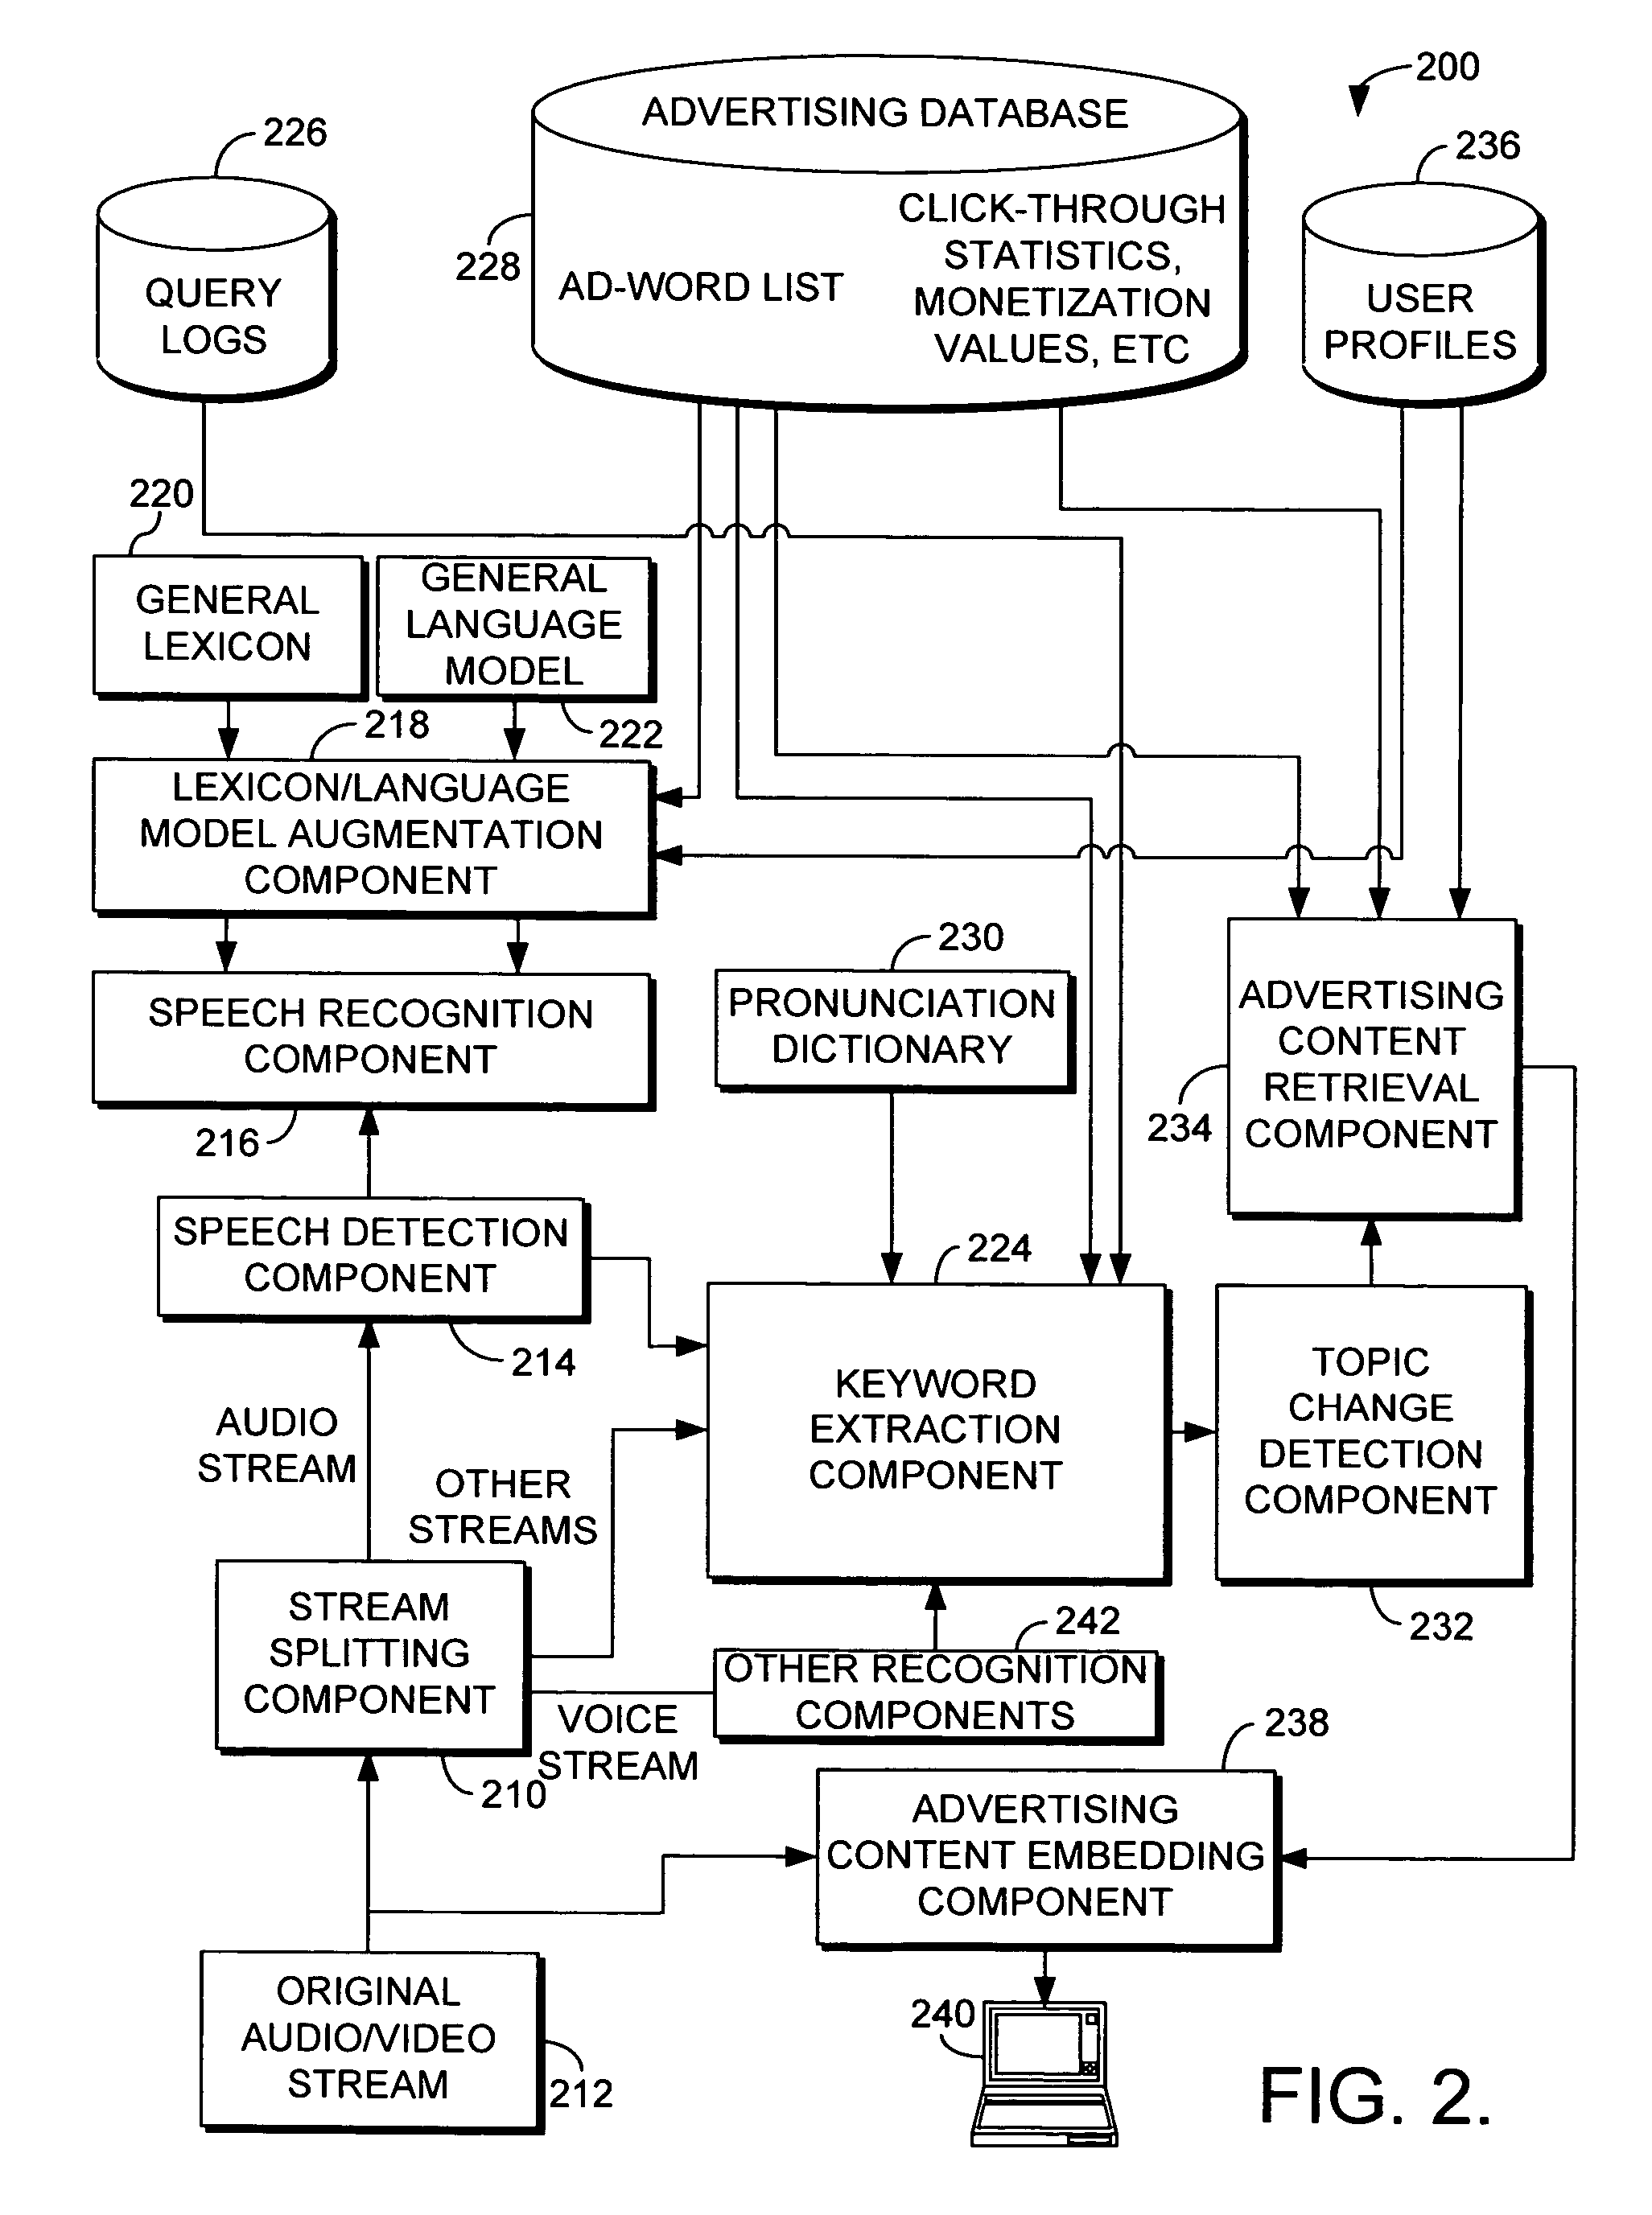 System and method for utilizing the content of audio/video files to select advertising content for display